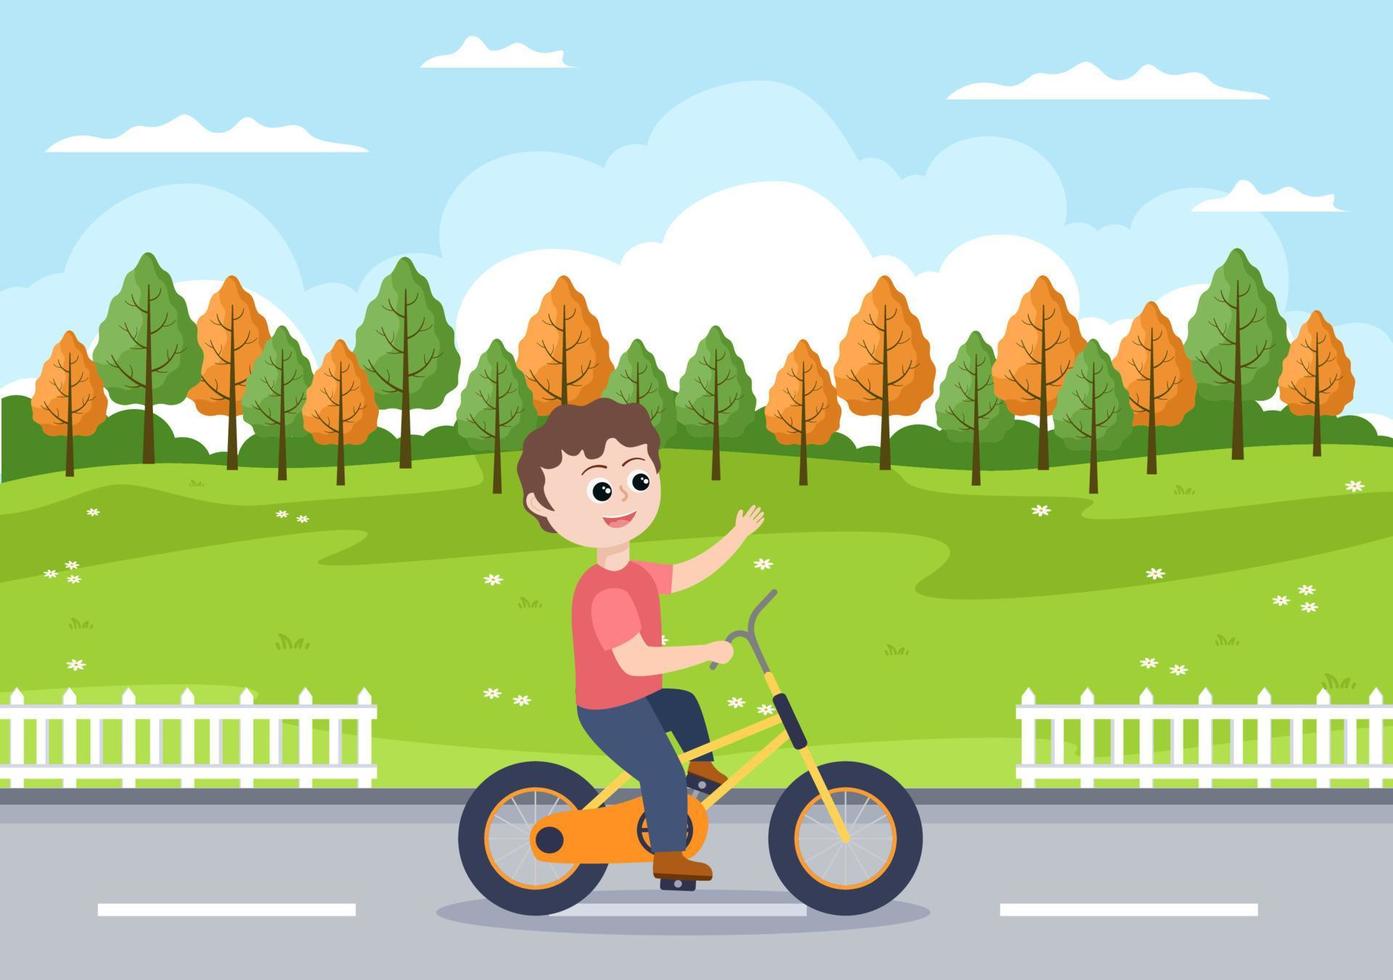 Bicycle Vector Flat Illustration. People Riding Bikes, Sports and outdoor recreational activities on Park Road or Highway are living a healthy lifestyle